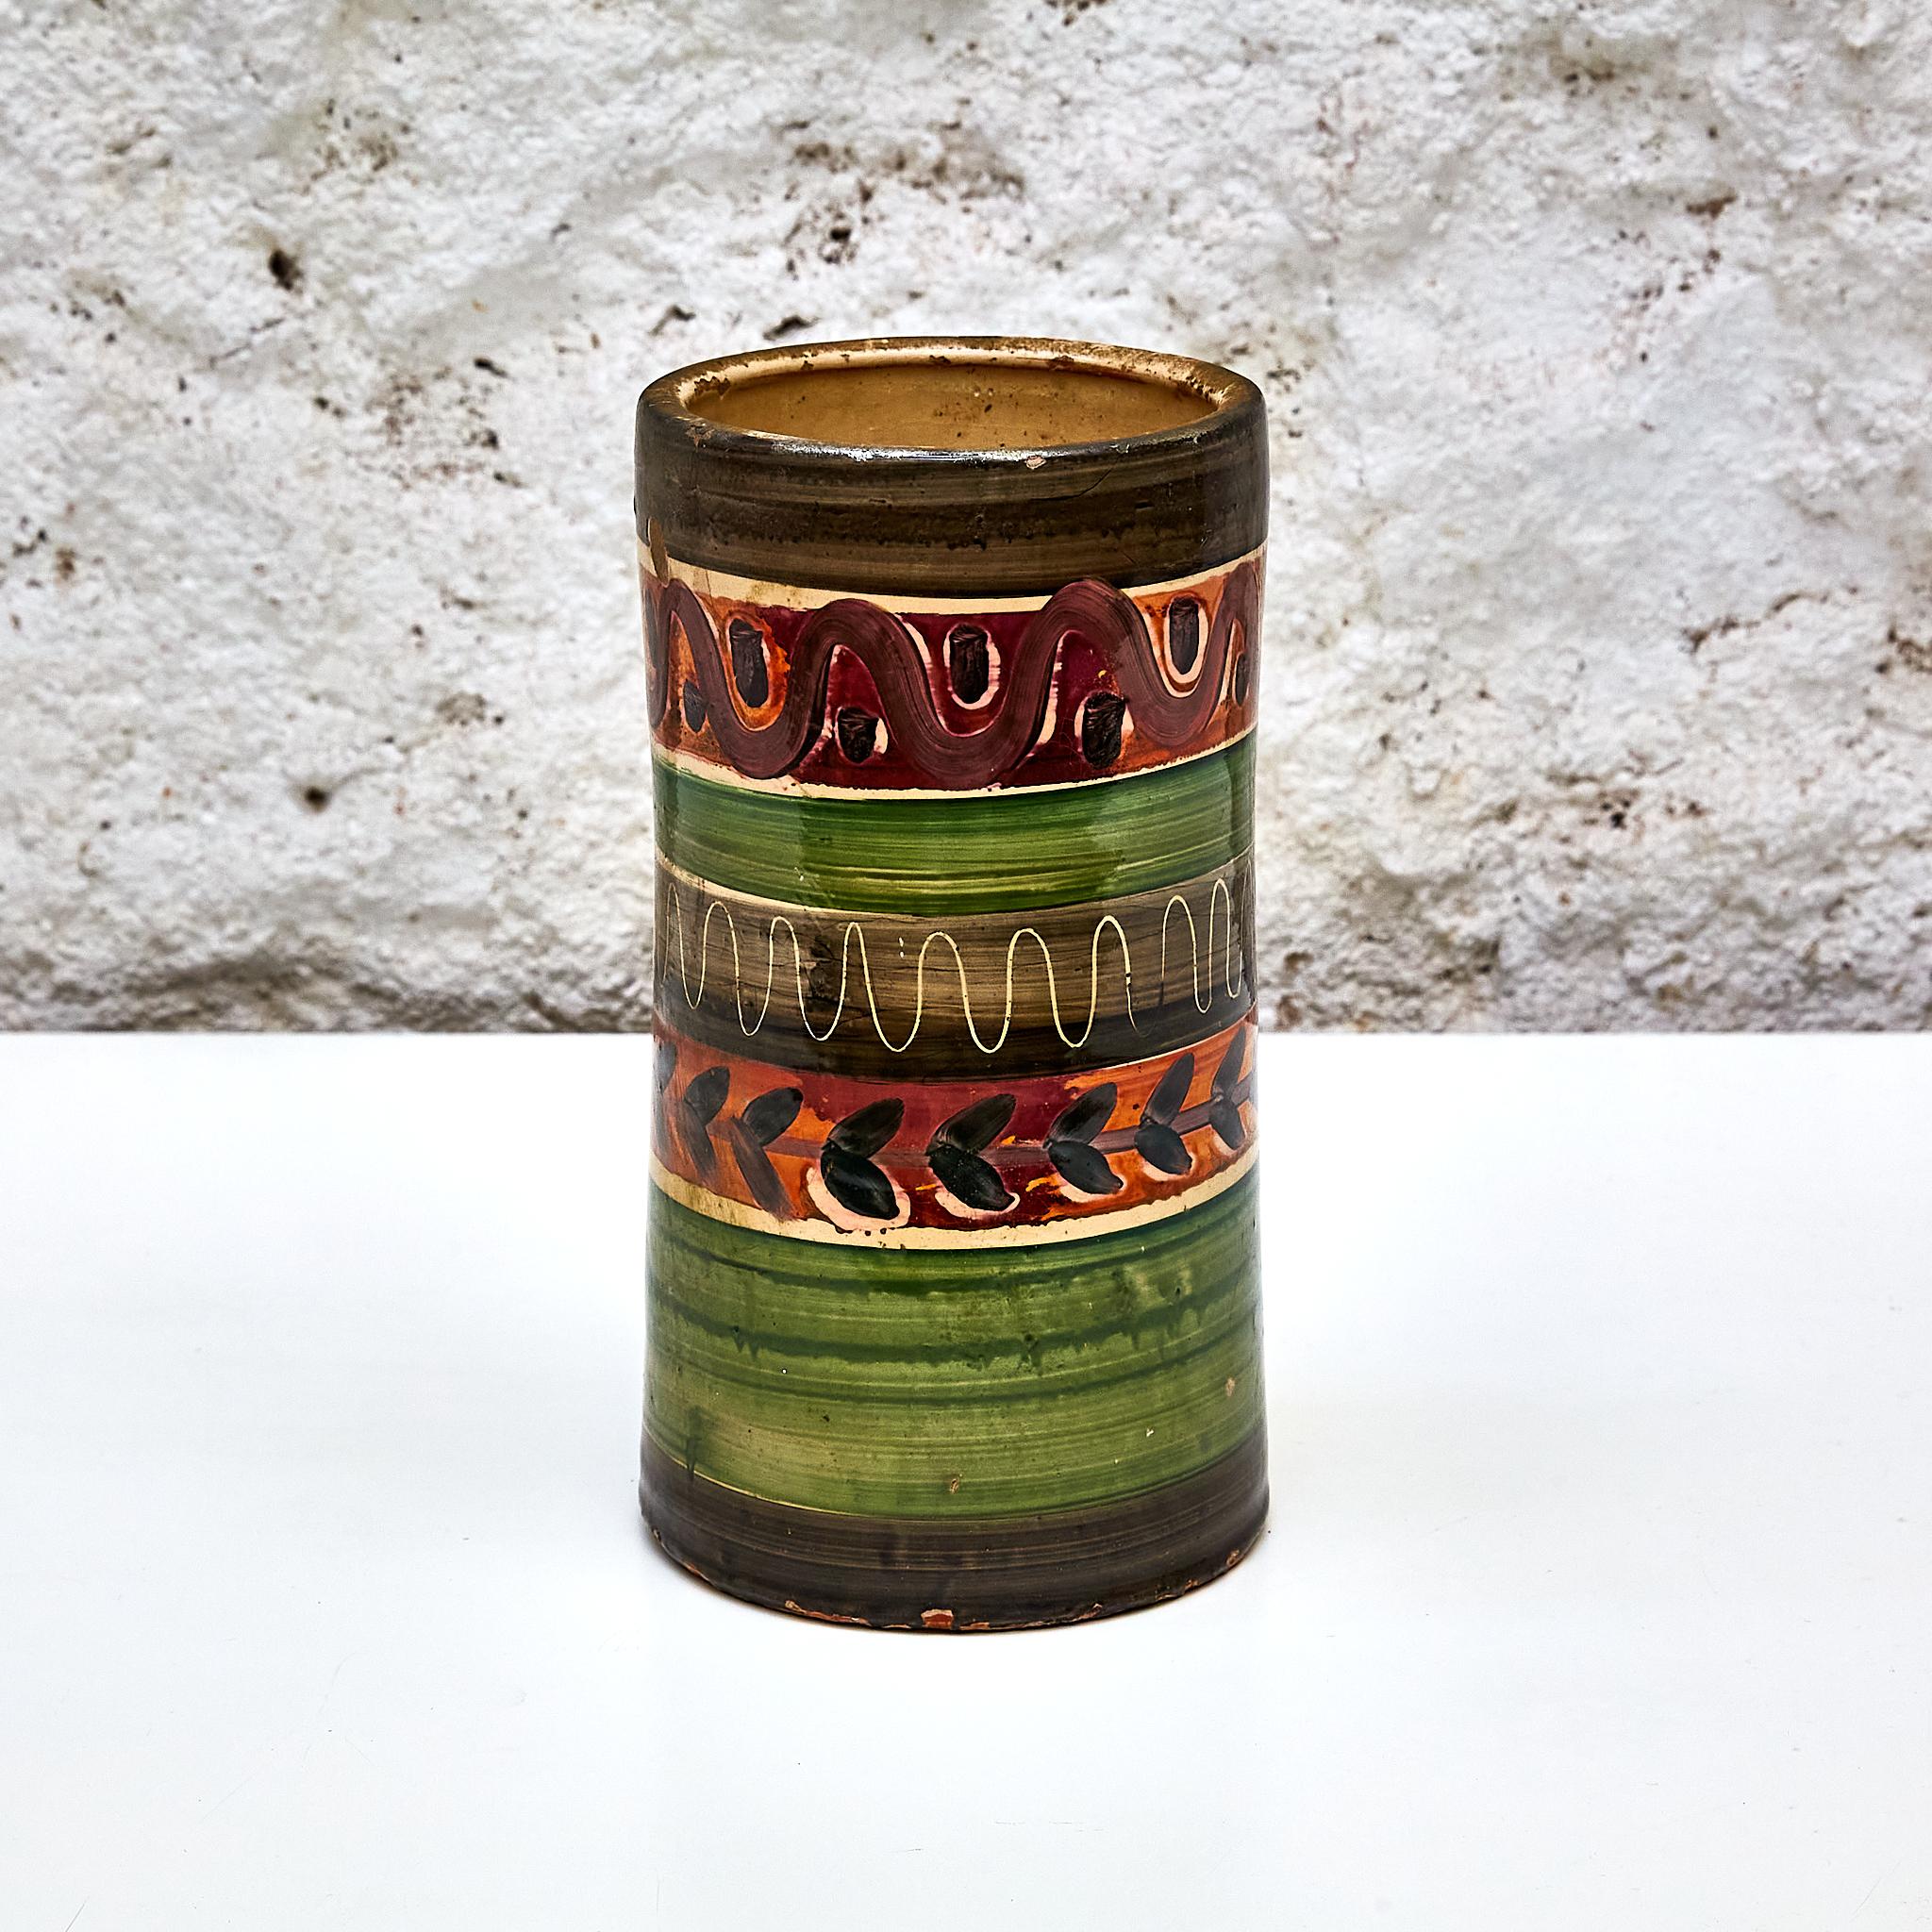 Ceramic Albarelo by Vergés.

Manufactured in Spain, circa 1920.

In original condition with minor wear consistent of age and use, preserving a beautiful patina.

Materials: 
Ceramic.

Dimensions: 
Diam 12 cm x H 21 cm.

Important